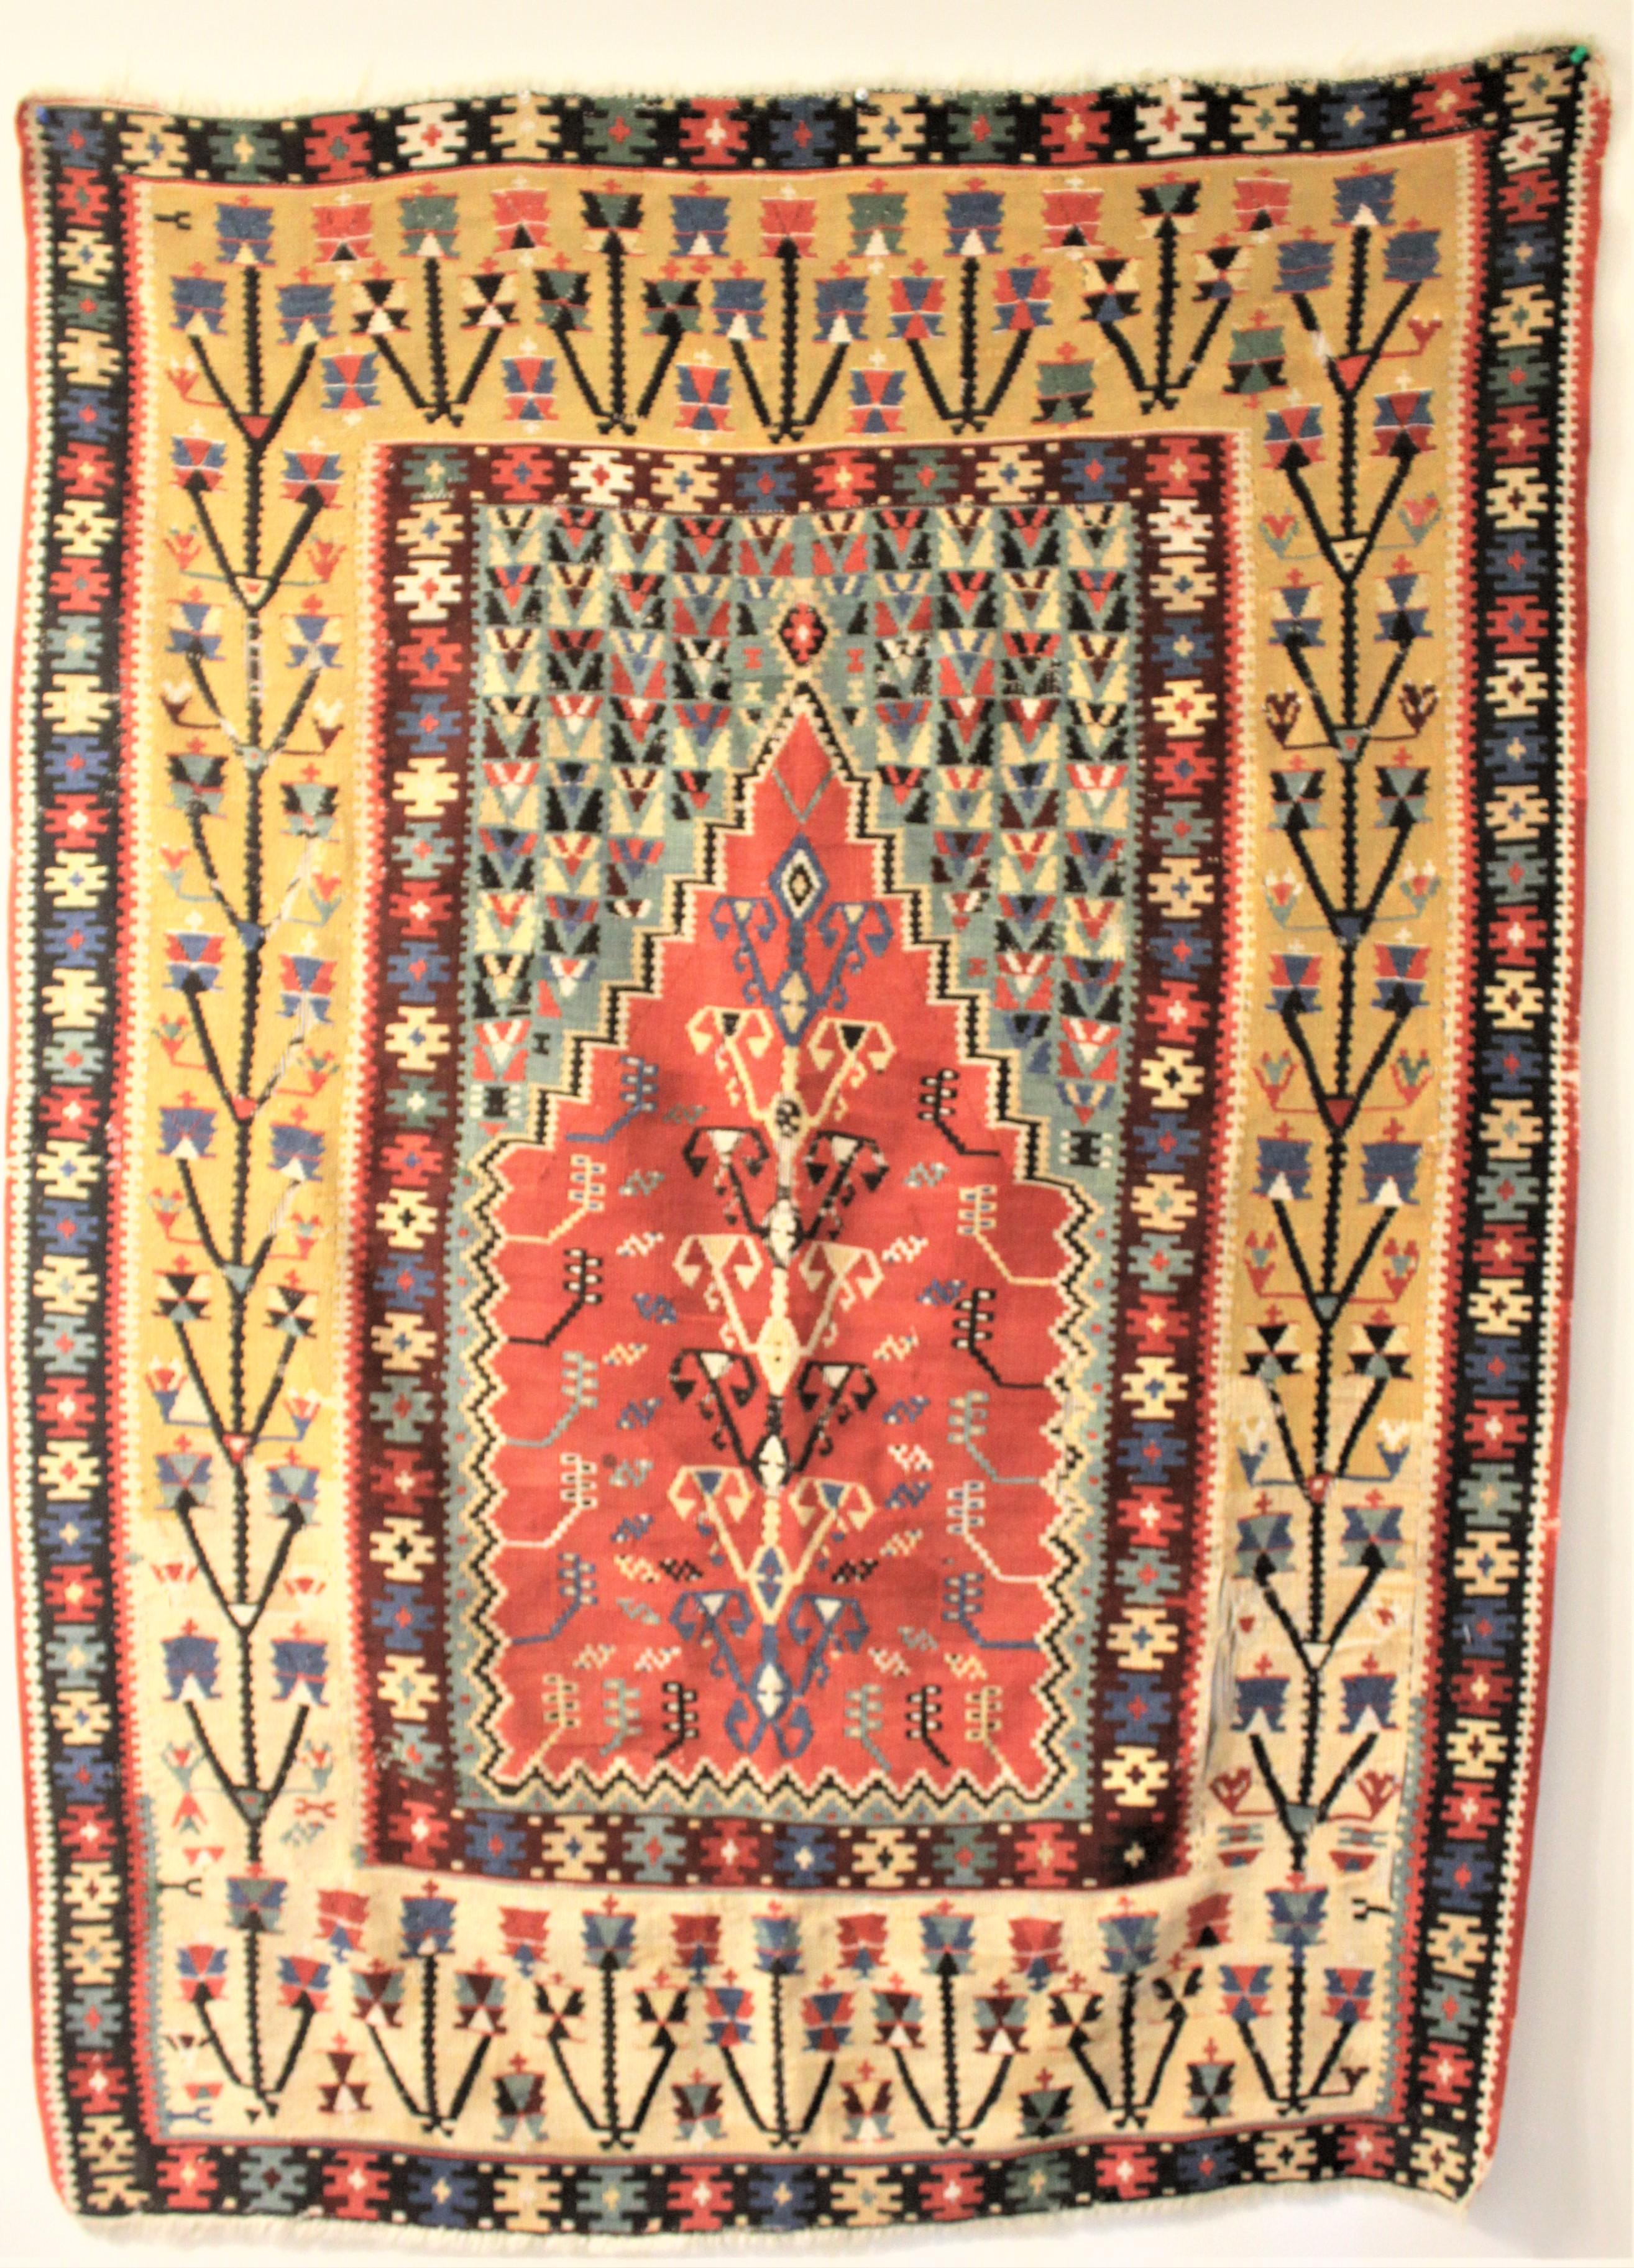 This antique handwoven prayer rug was made in what is now Turkey, and dates to circa 1750-1780. This rug is done in a background of pastel hues which accent the muted red central 